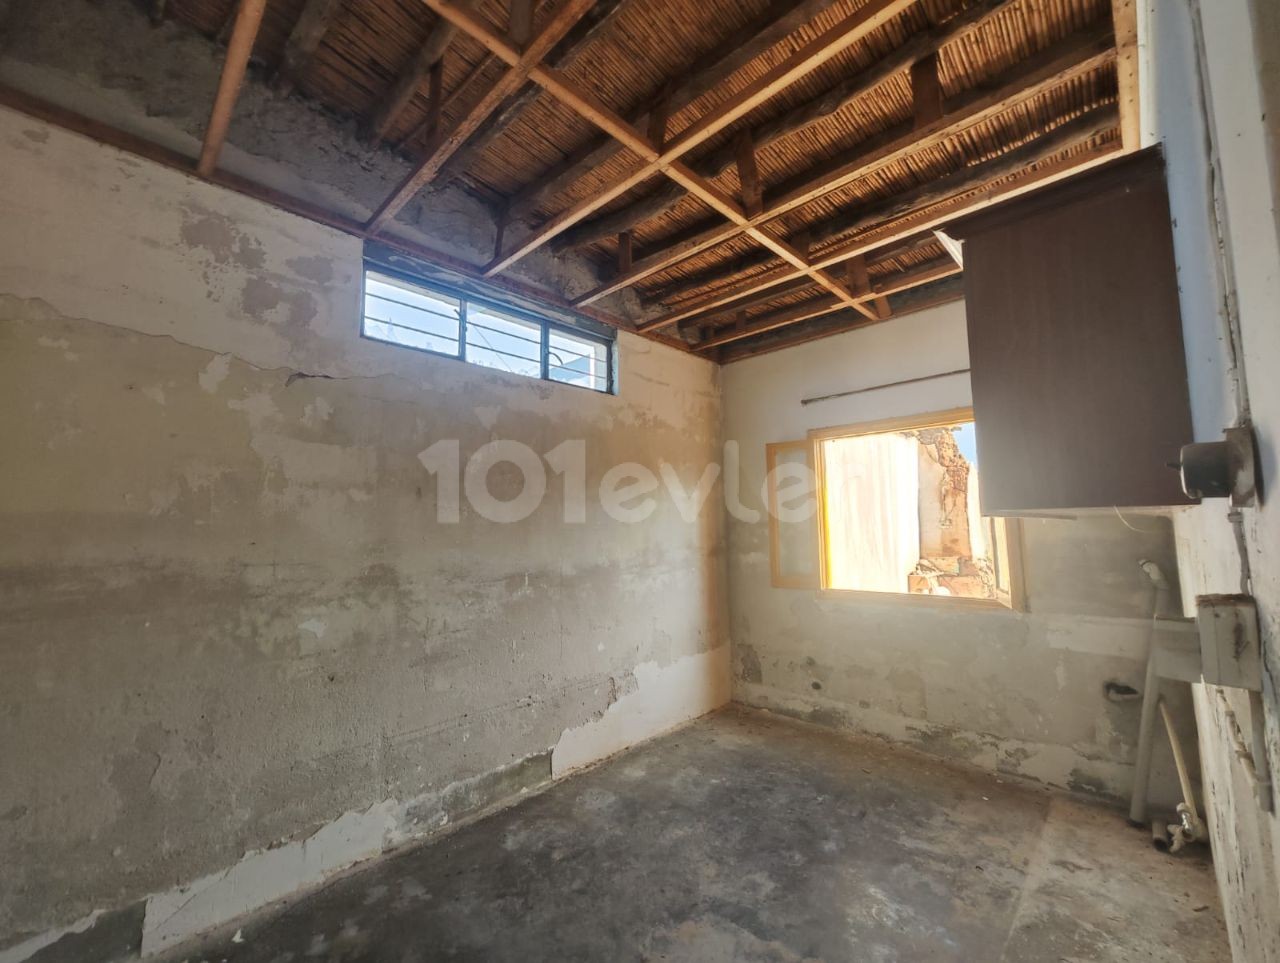 DETACHED HOUSE FOR SALE IN AKOVA VILLAGE BETWEEN GEÇİTKALE AND İSKELE